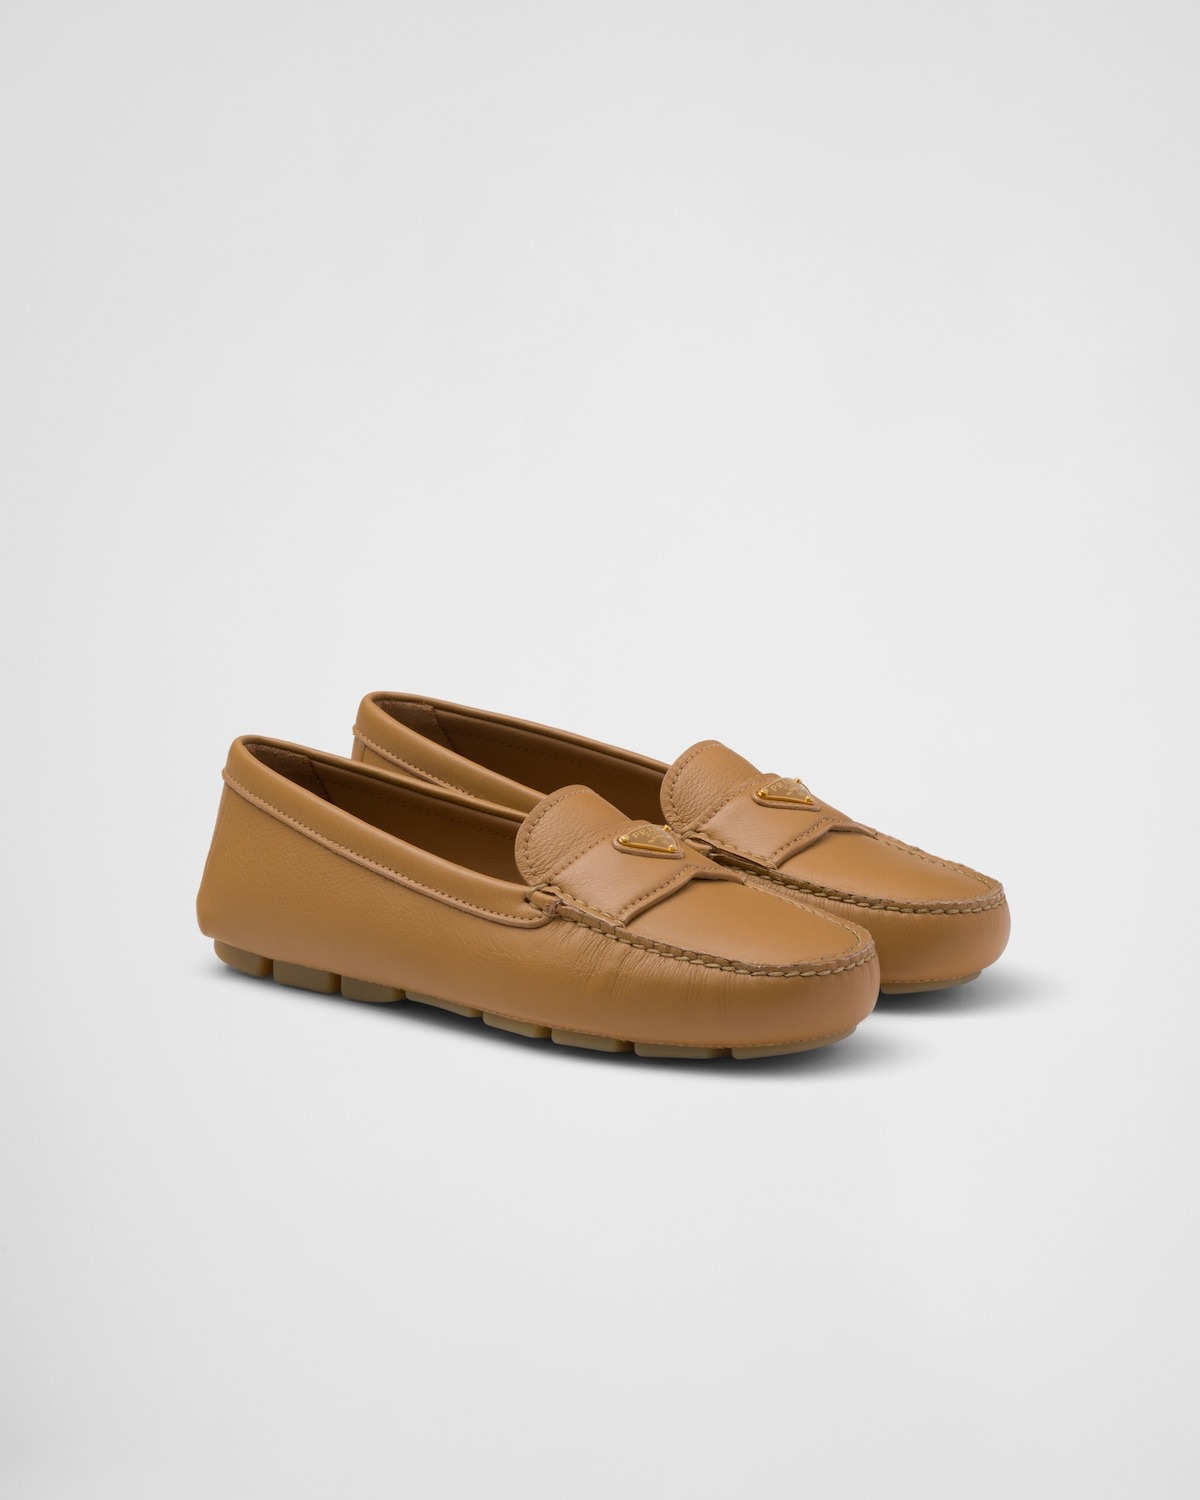 Prada Leather Driving Loafers